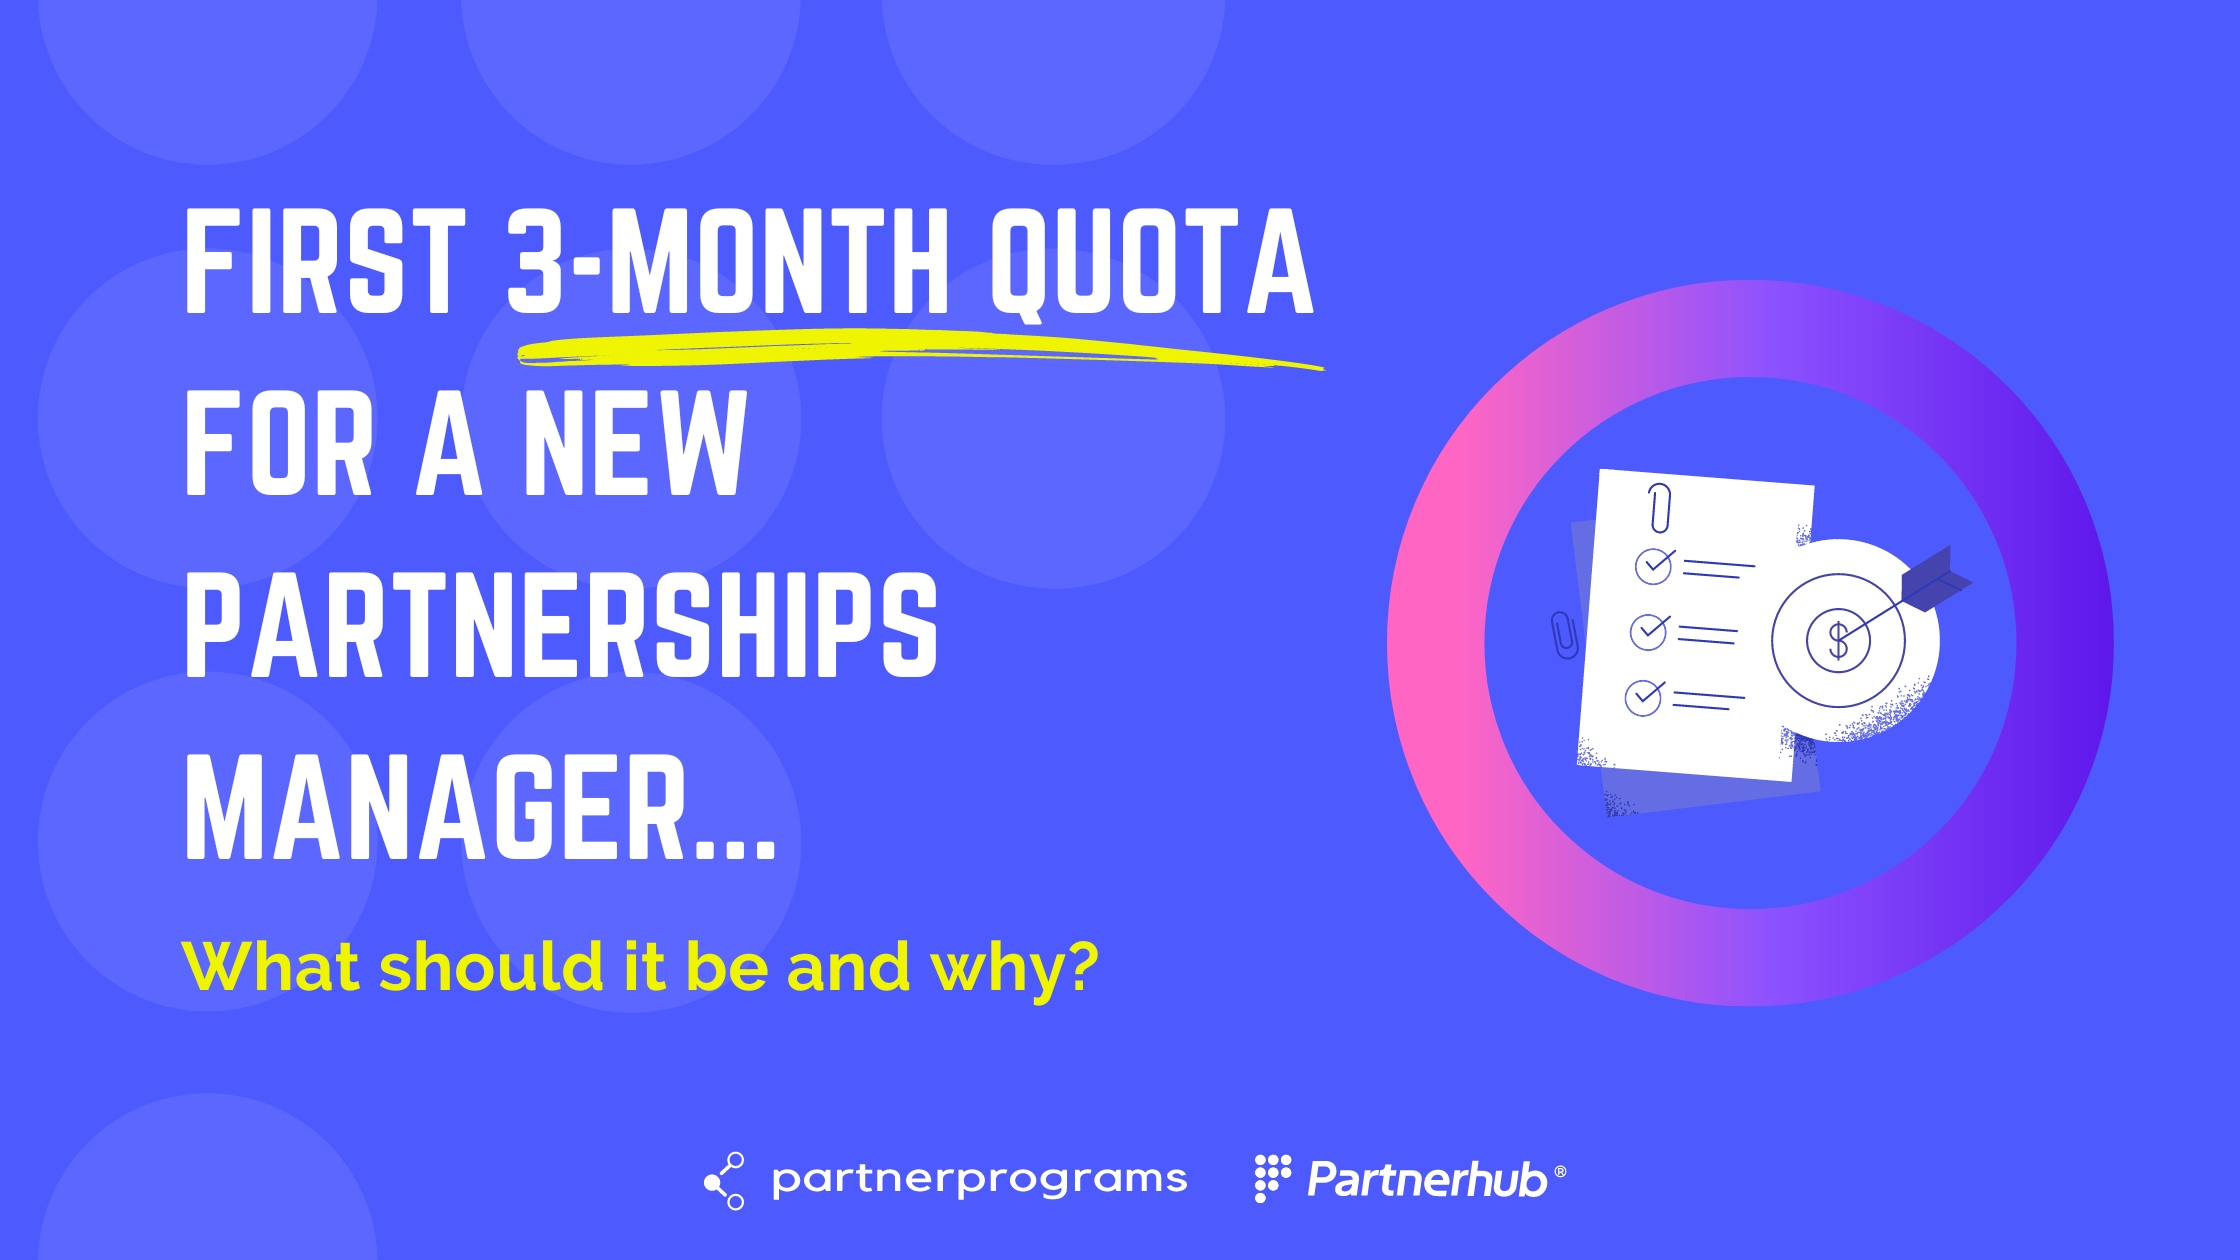 New Partnerships Managers, What should your first 3-month quota be?